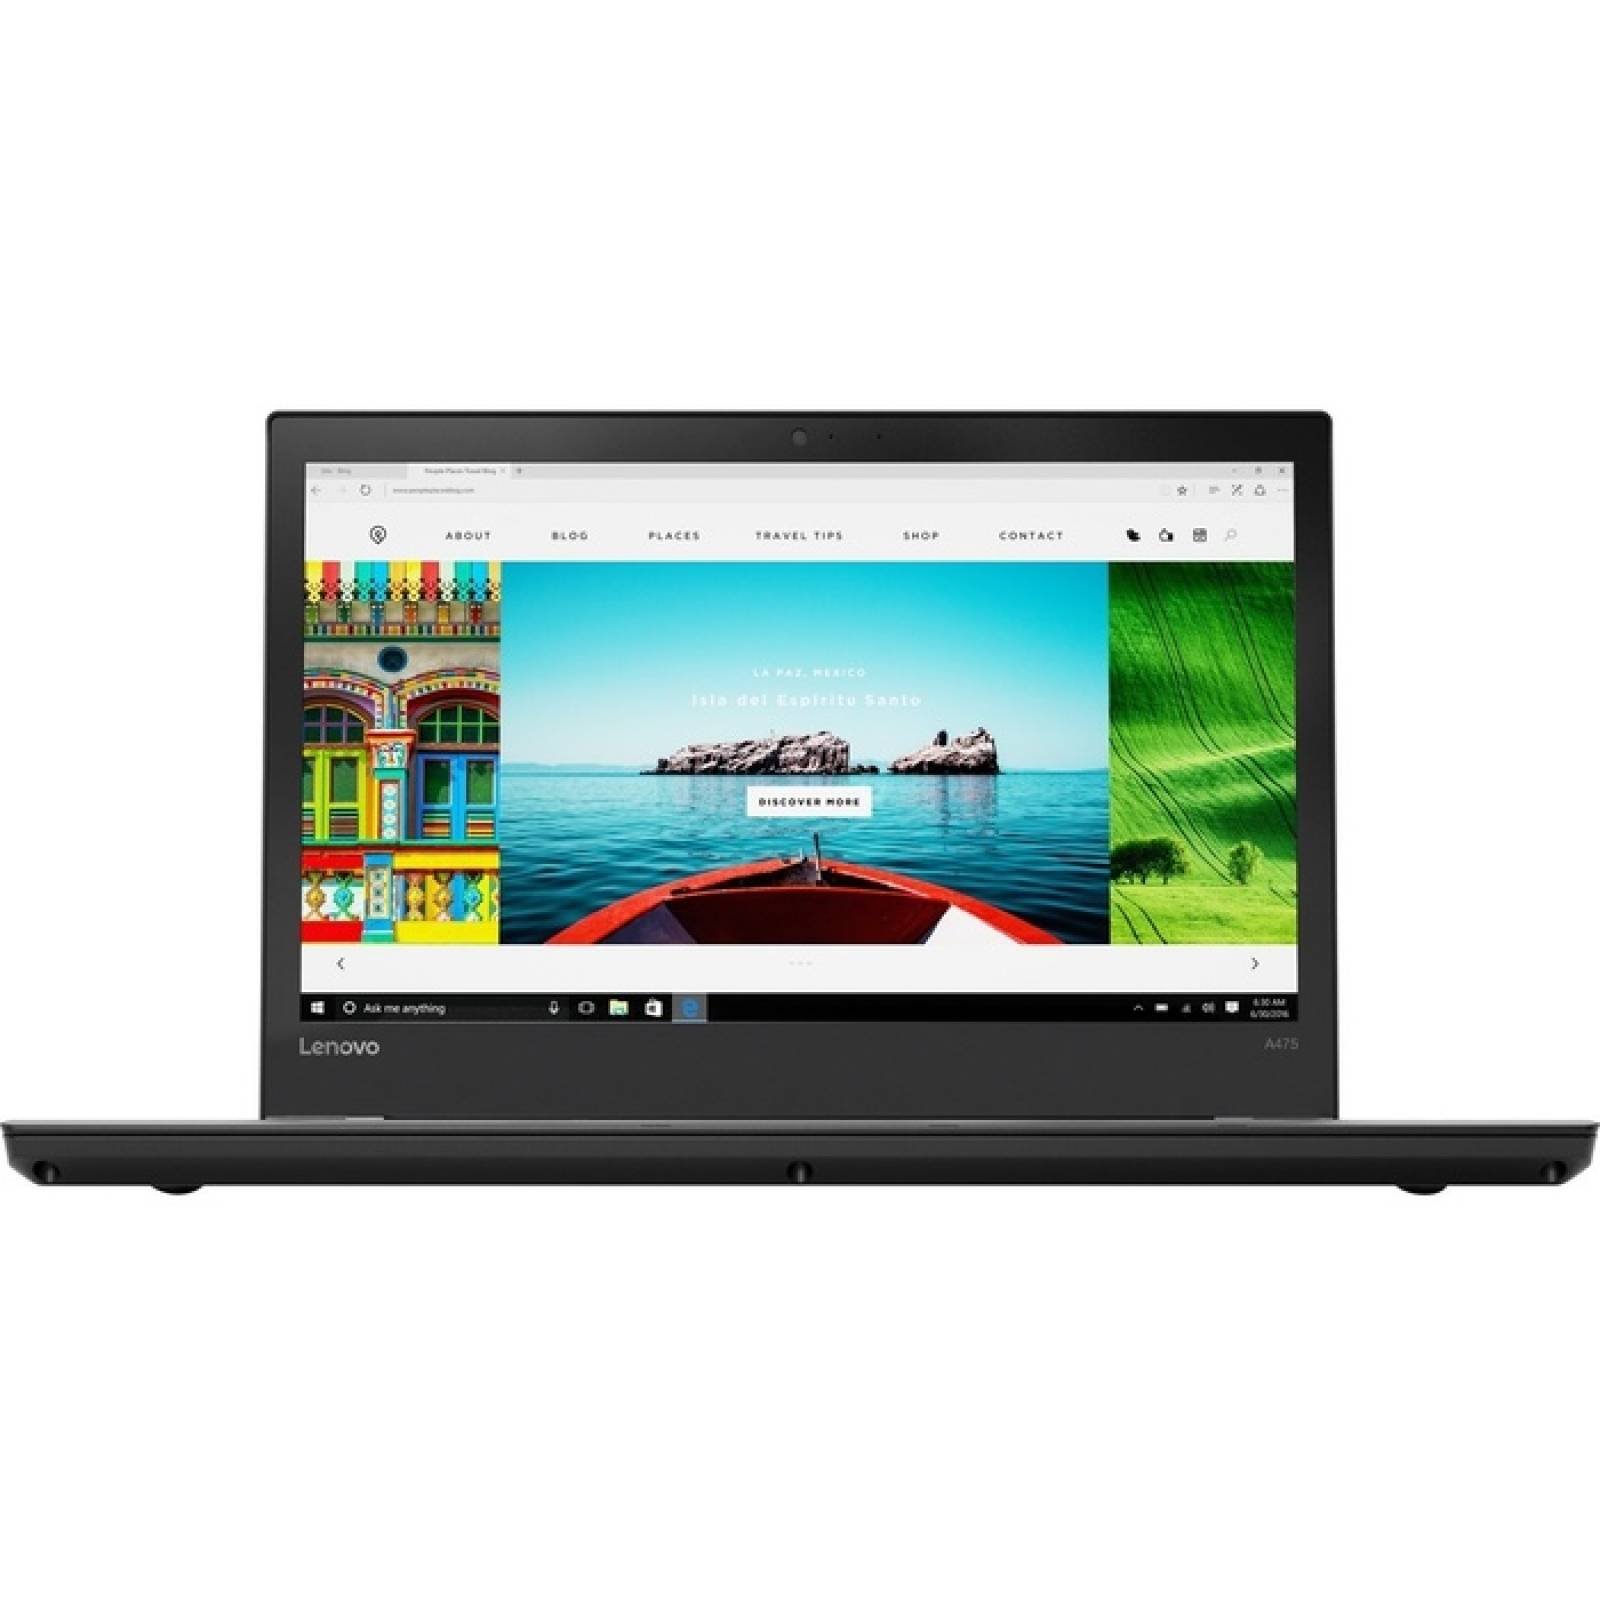 Lenovo ThinkPad A475 20KL0017US 14 quotLCD Notebook  AMD ASeries A129800B Quadcore (4 Core) 270 GHz  8 GB DDR4 S